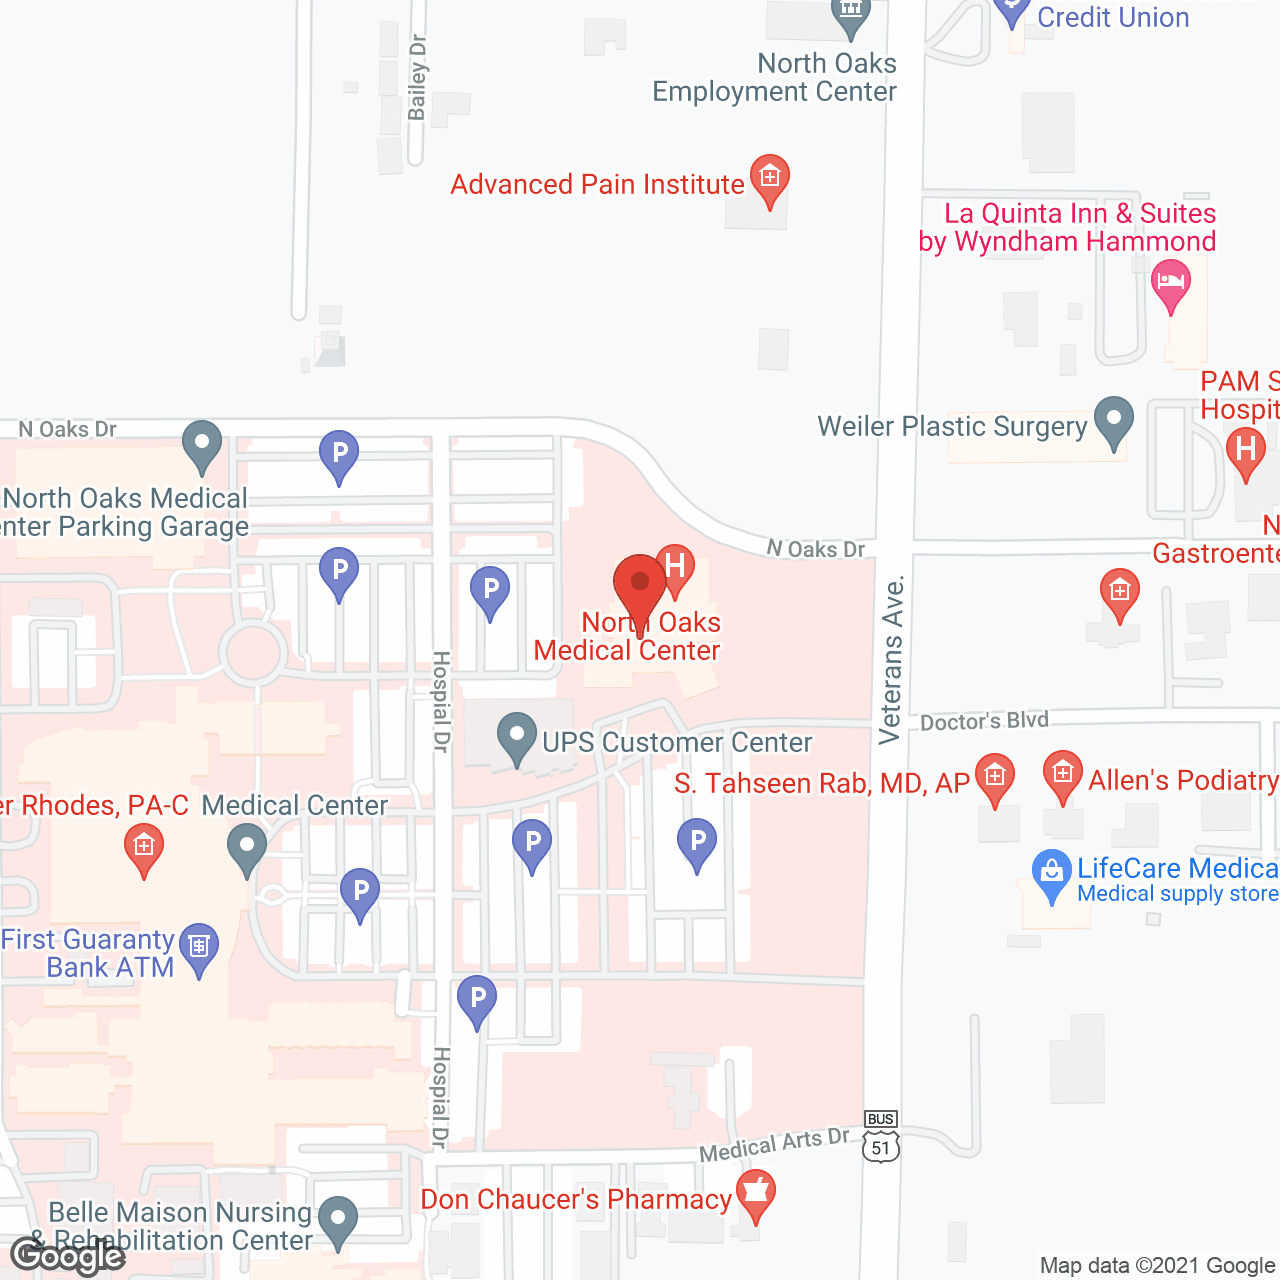 North Oaks Medical Ctr in google map